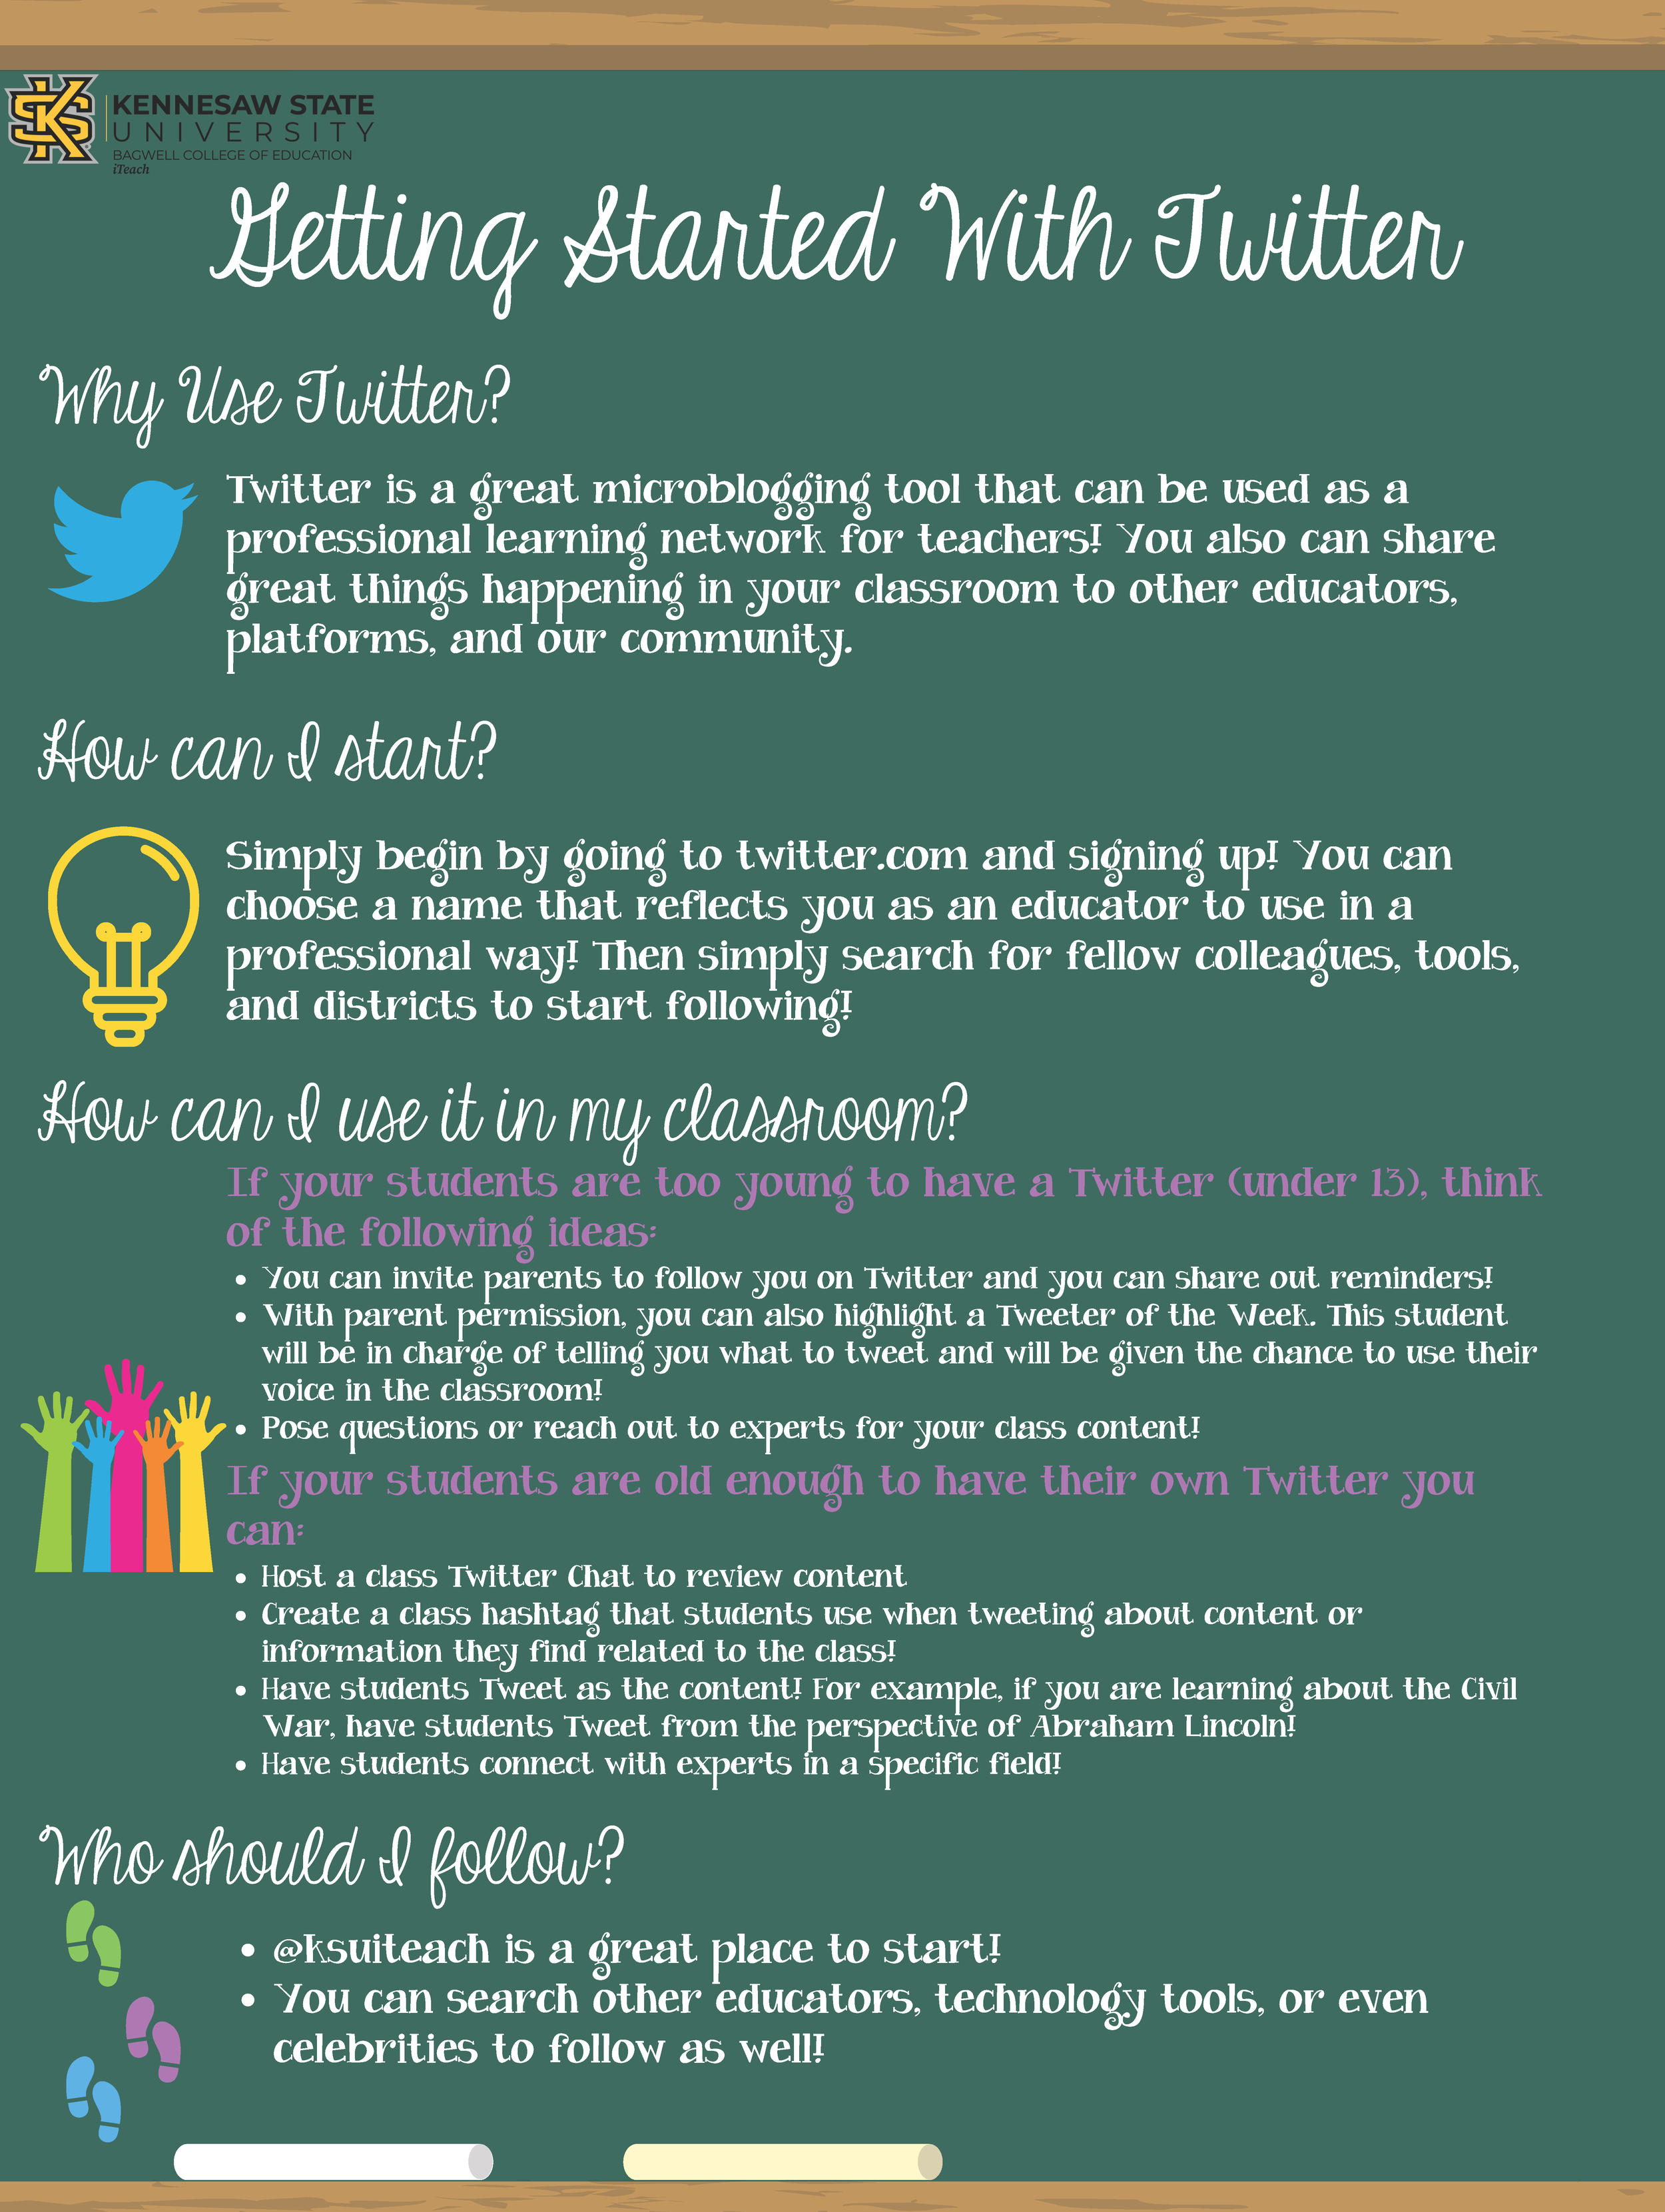 Getting Started With Twitter (2).png